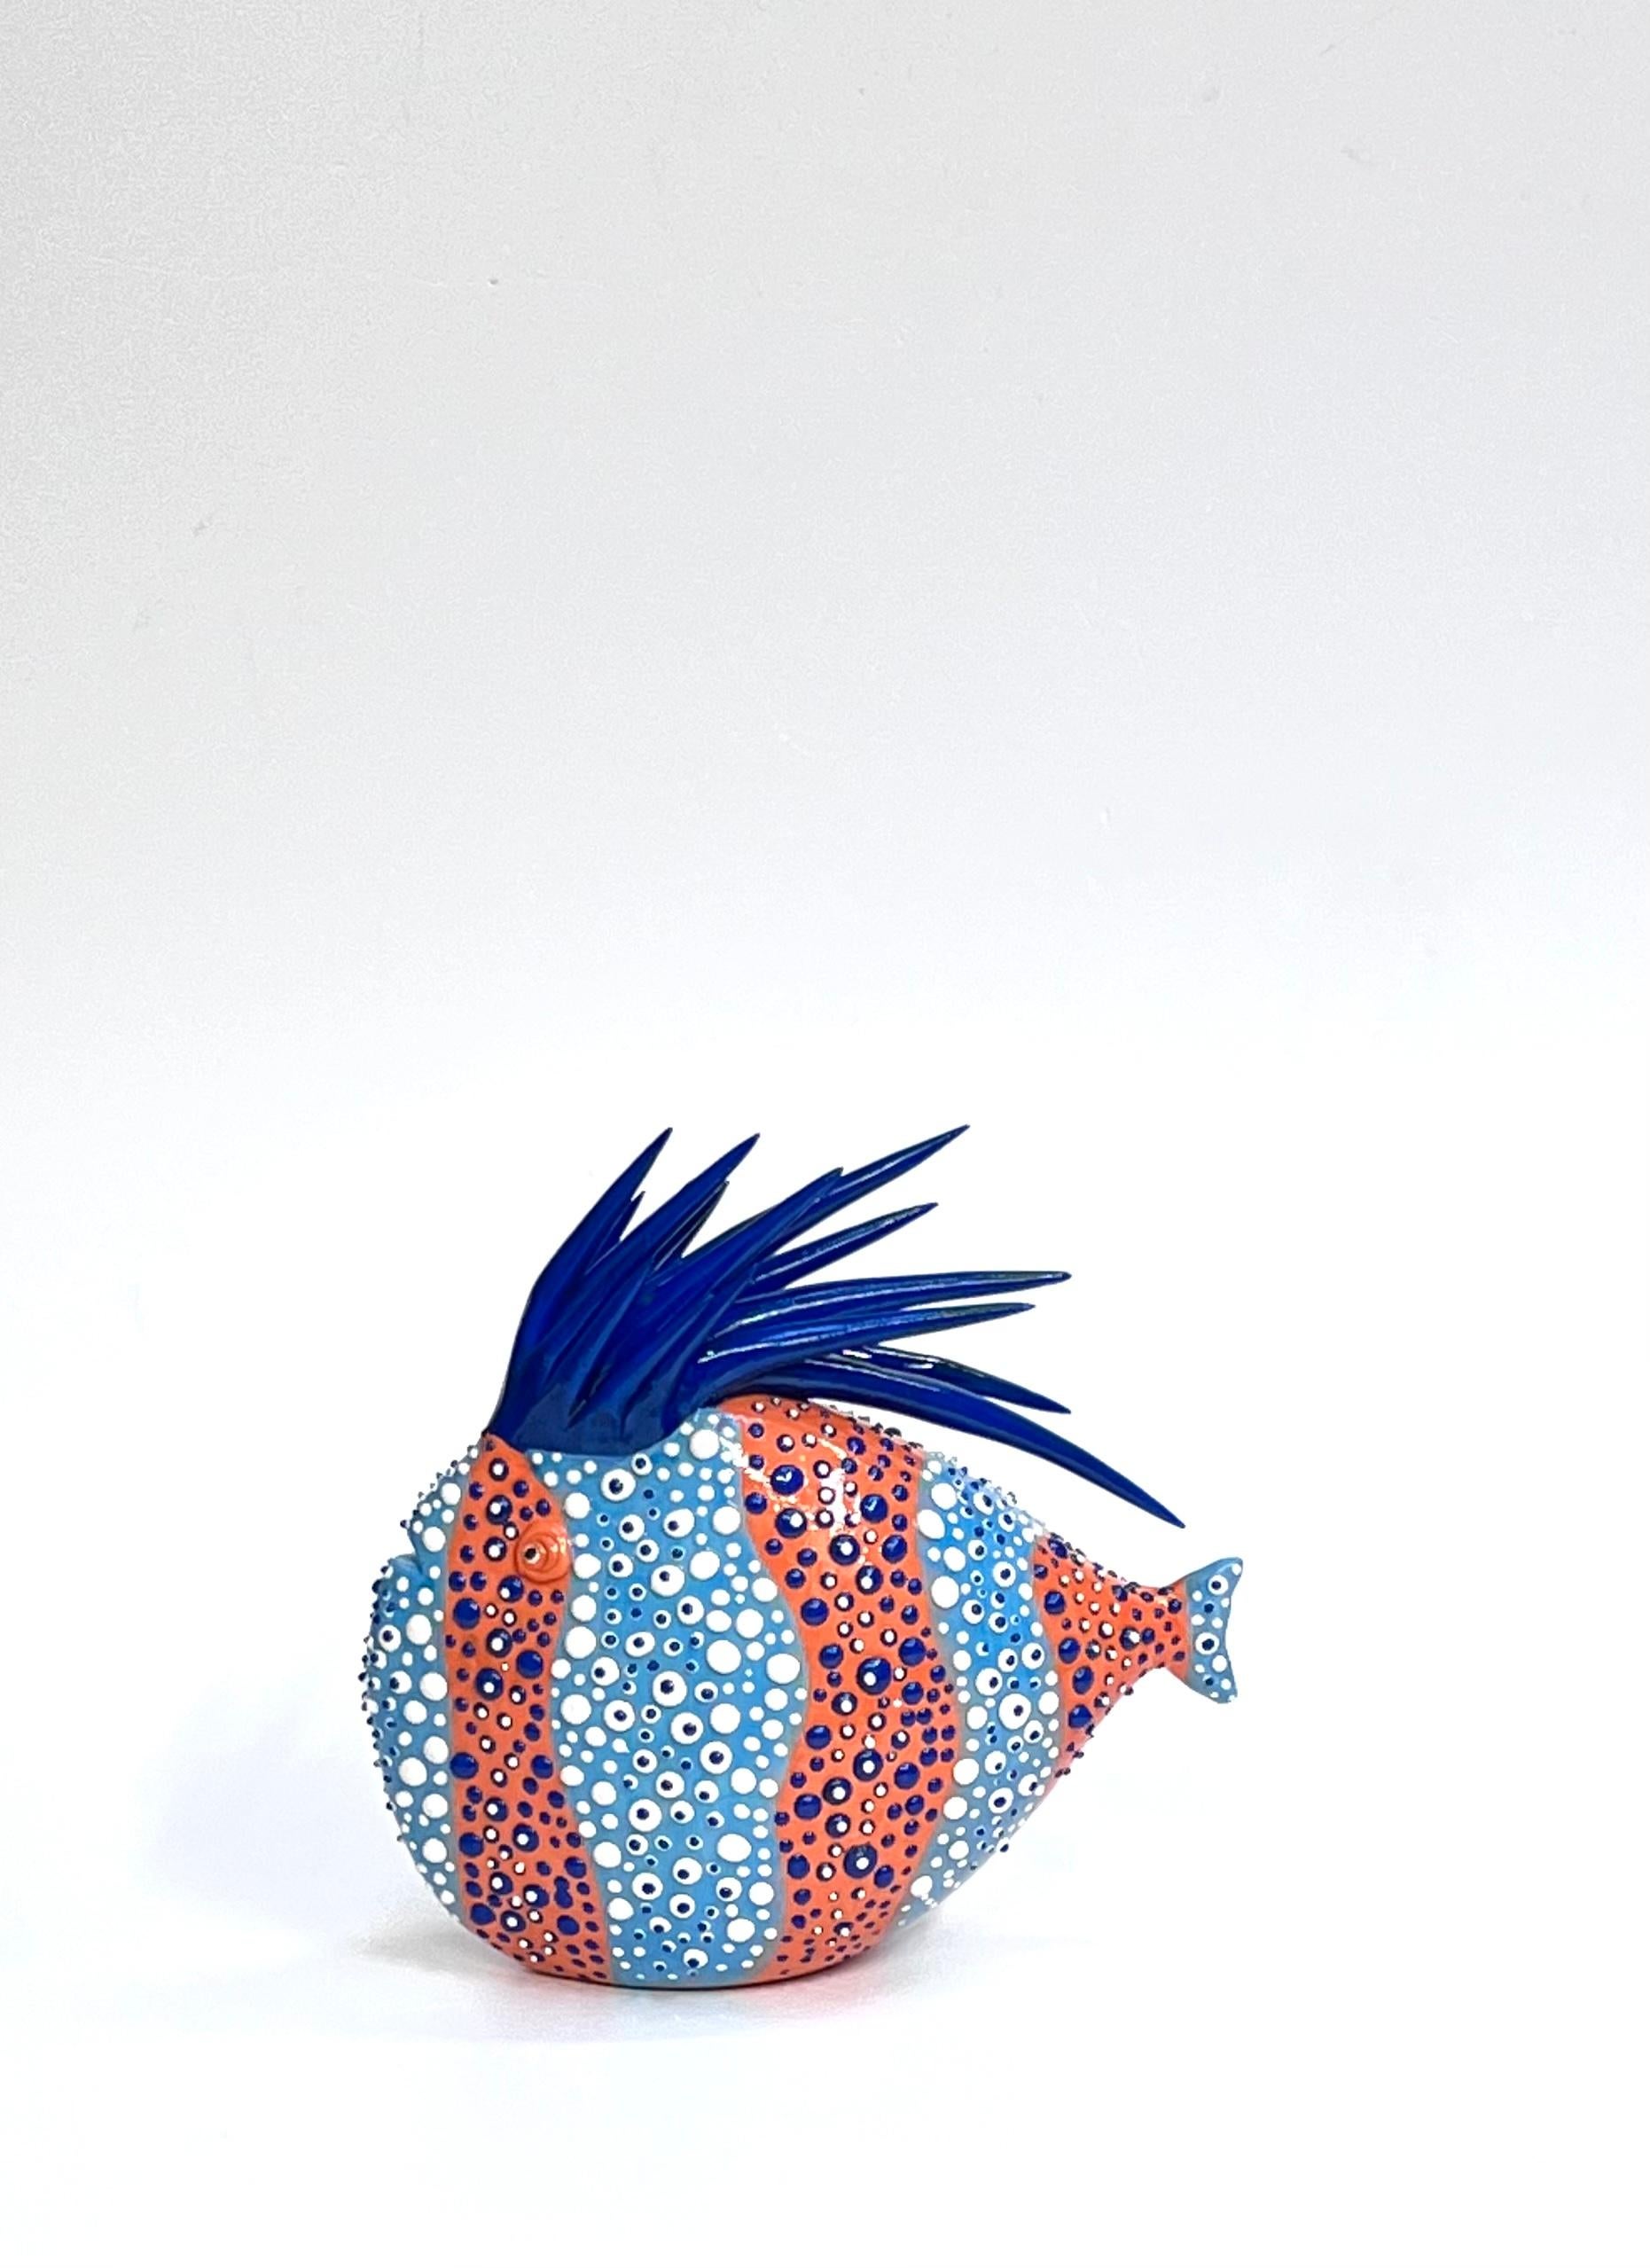 Mosche Bianche is glad to add those wonderful fishes to its collection. The fishes are all handmade and bespoke: choose the colors and shape you like! Our artisans can make also customized different sizes. Ask us for more!